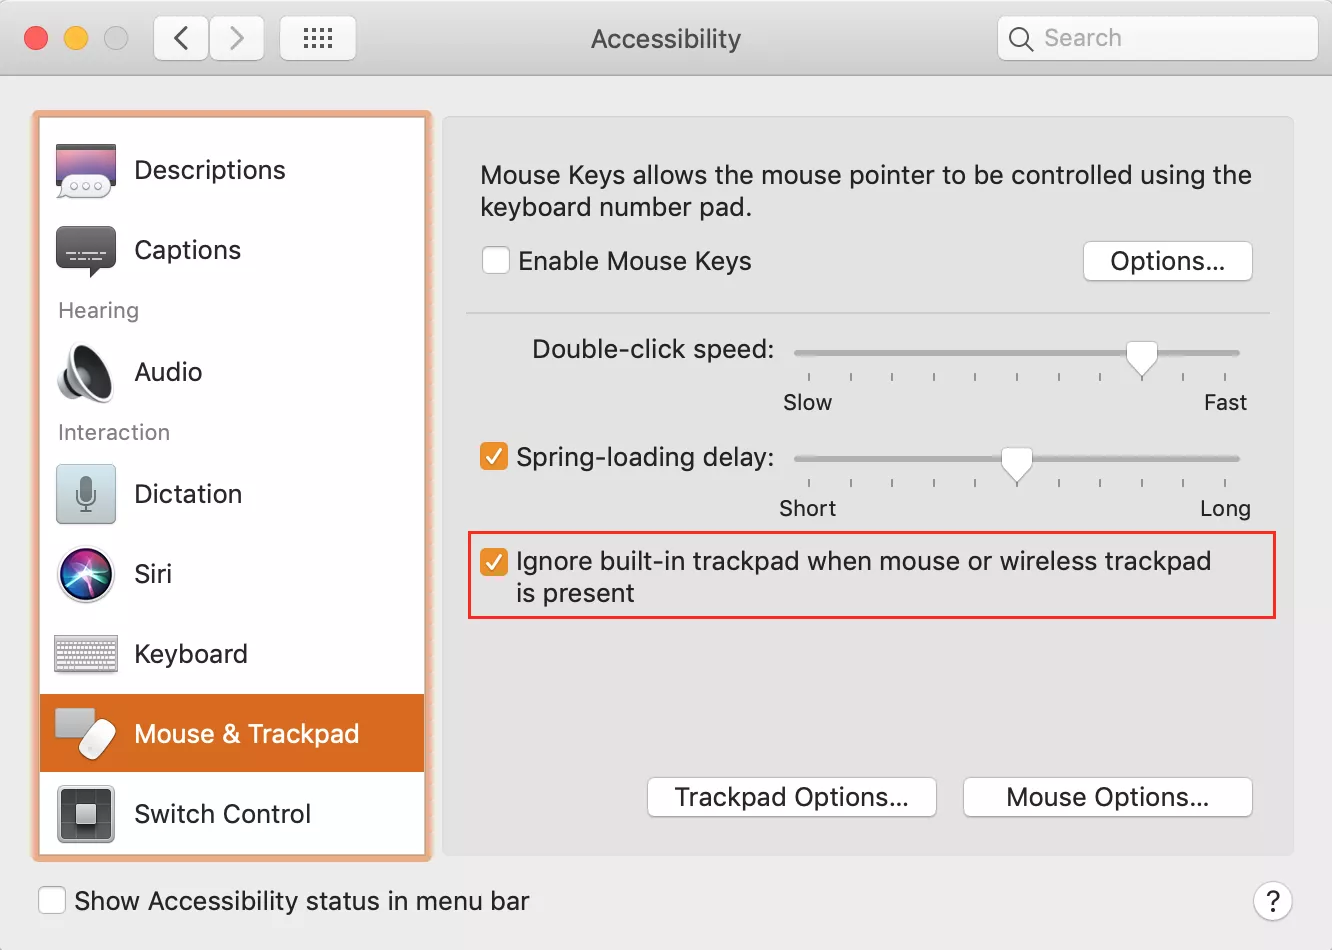 LinearMouse  The mouse and trackpad utility for Mac.